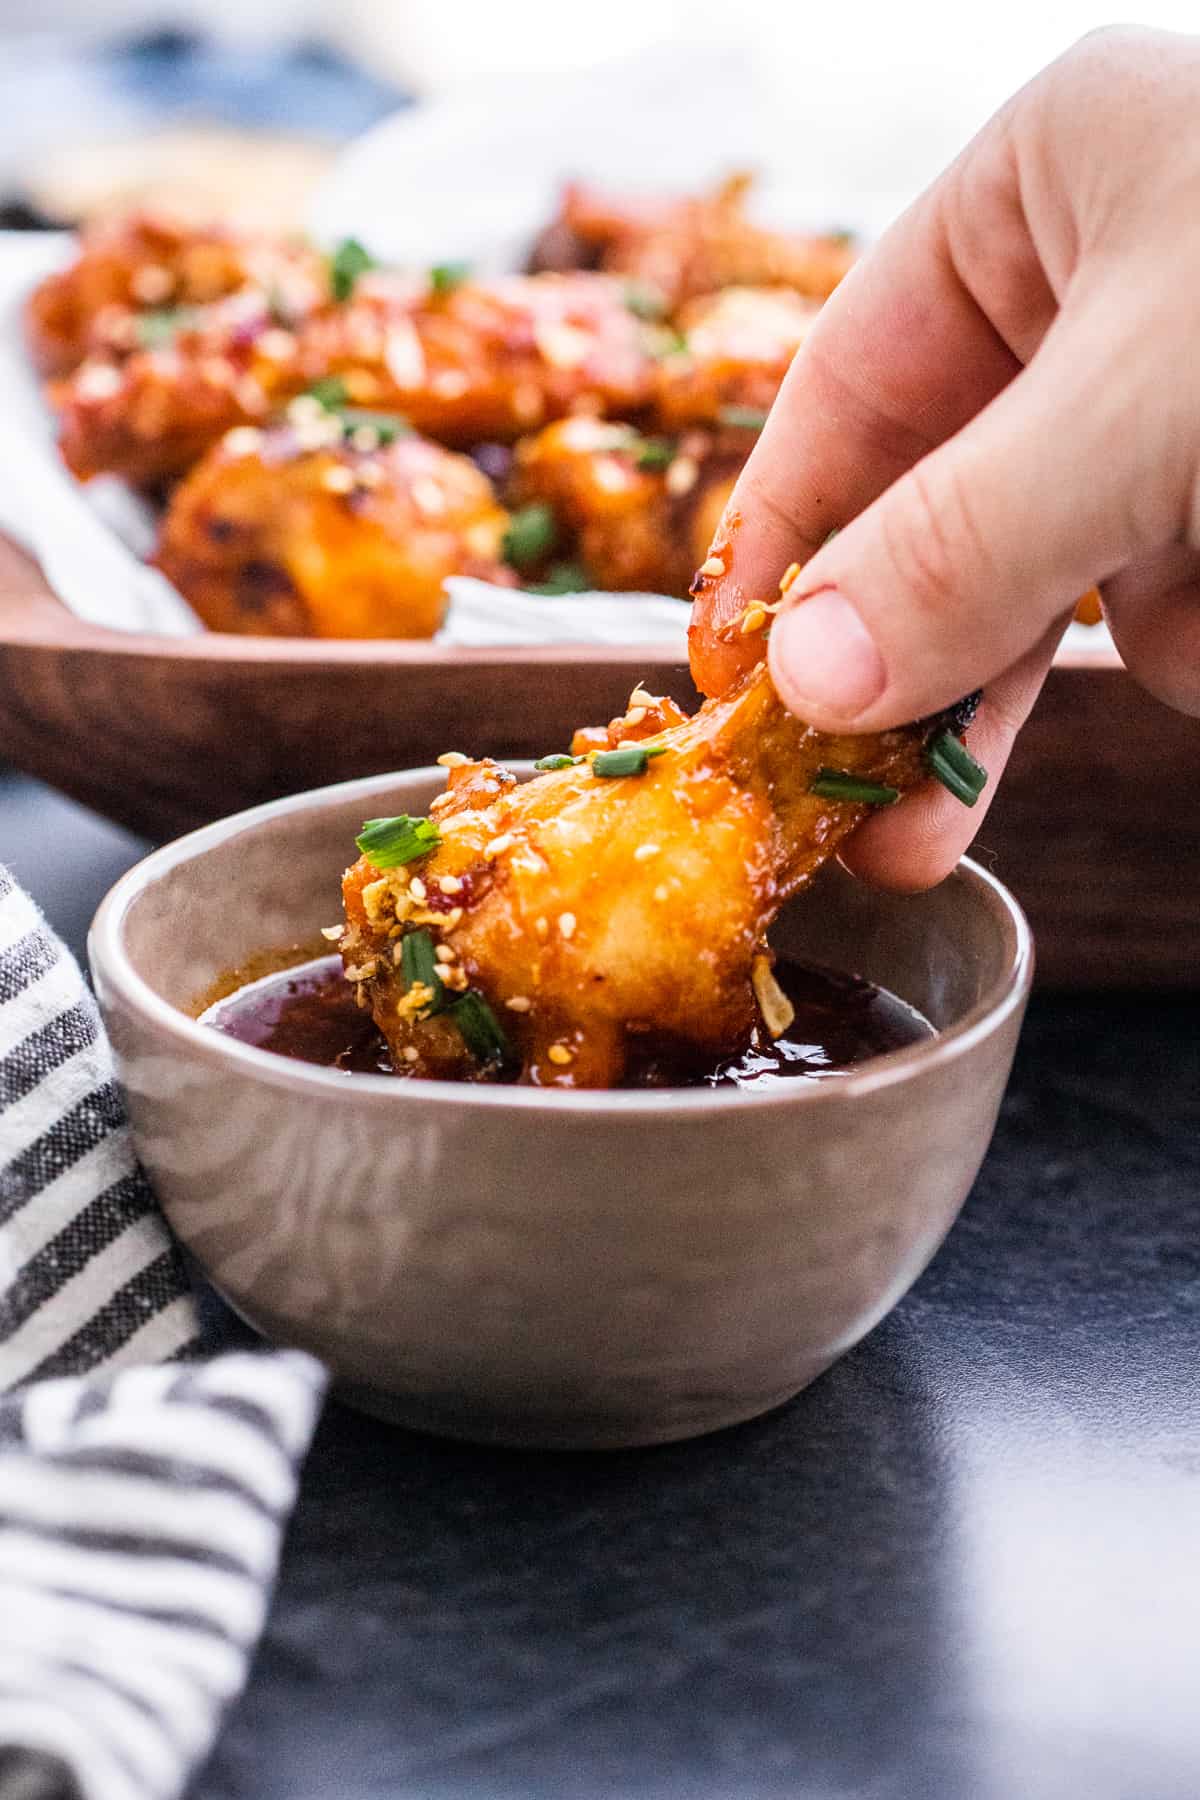 Hand dipping chicken wing into gray bowl filled with sauce.